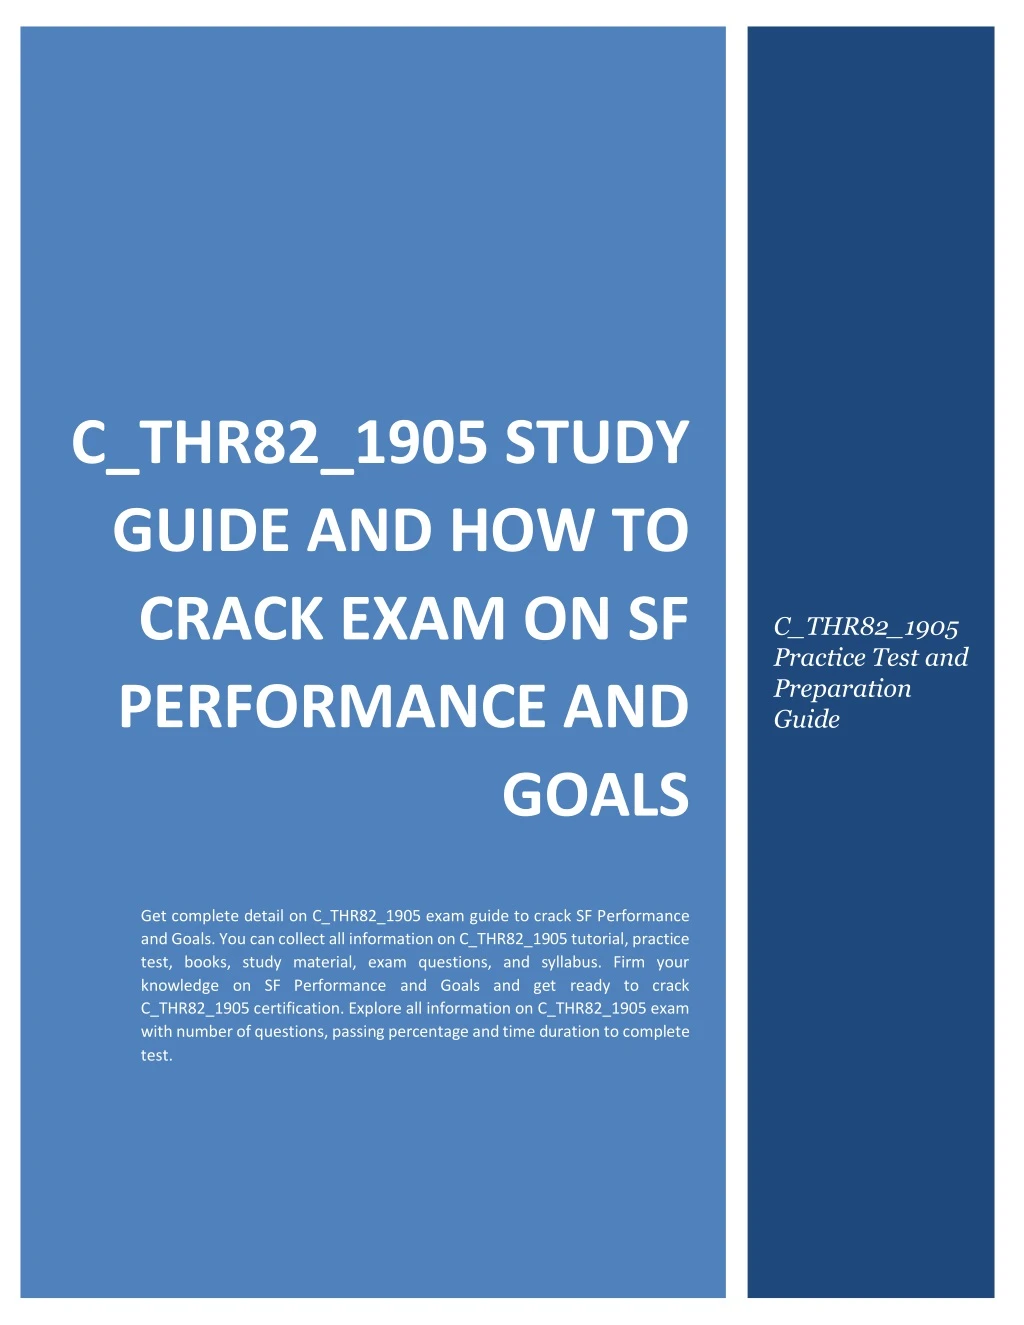 c thr82 1905 study guide and how to crack exam